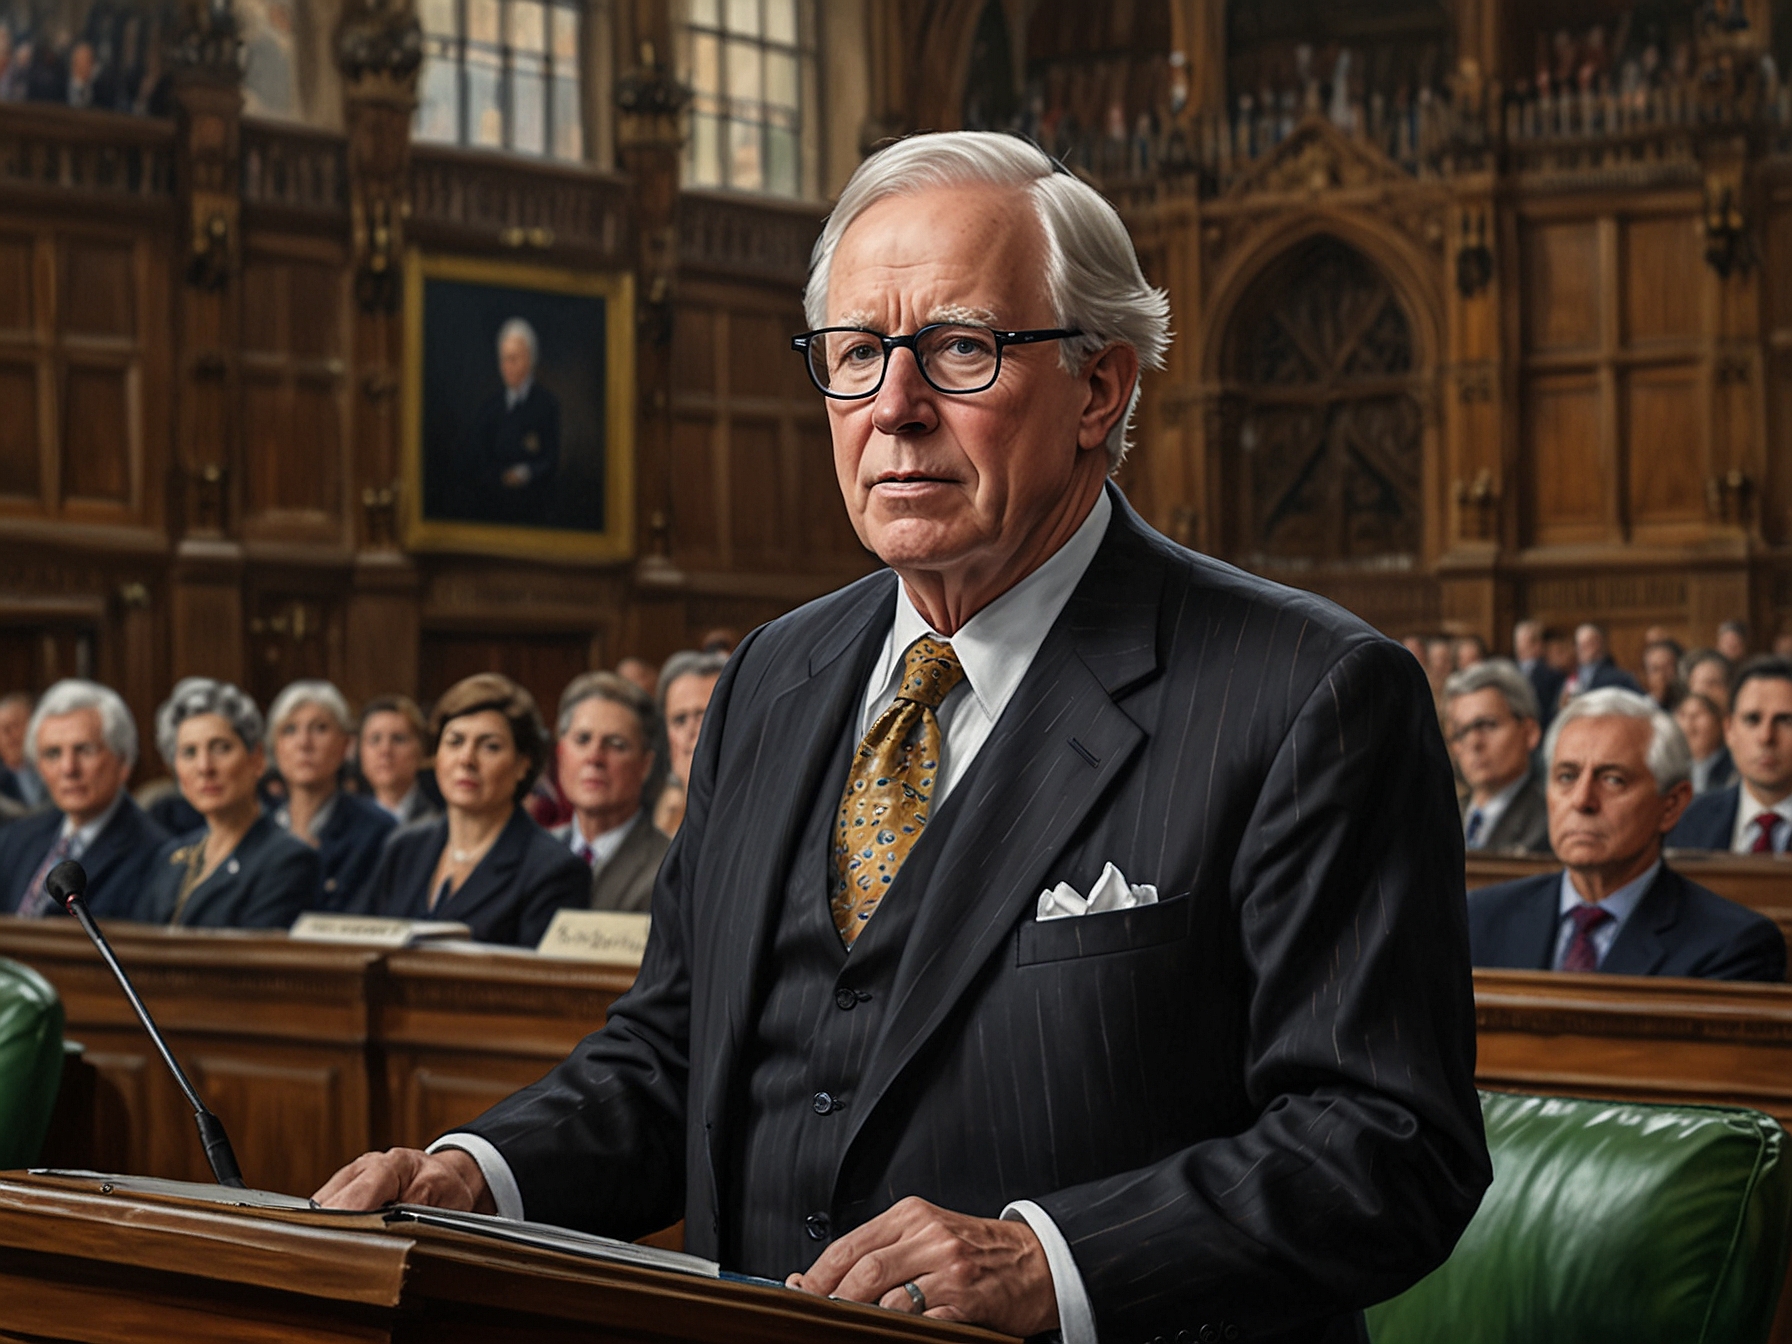 John McKay addresses the House of Commons with his signature straightforwardness and wit, highlighting his long-standing tenure and contributions to Canadian politics.